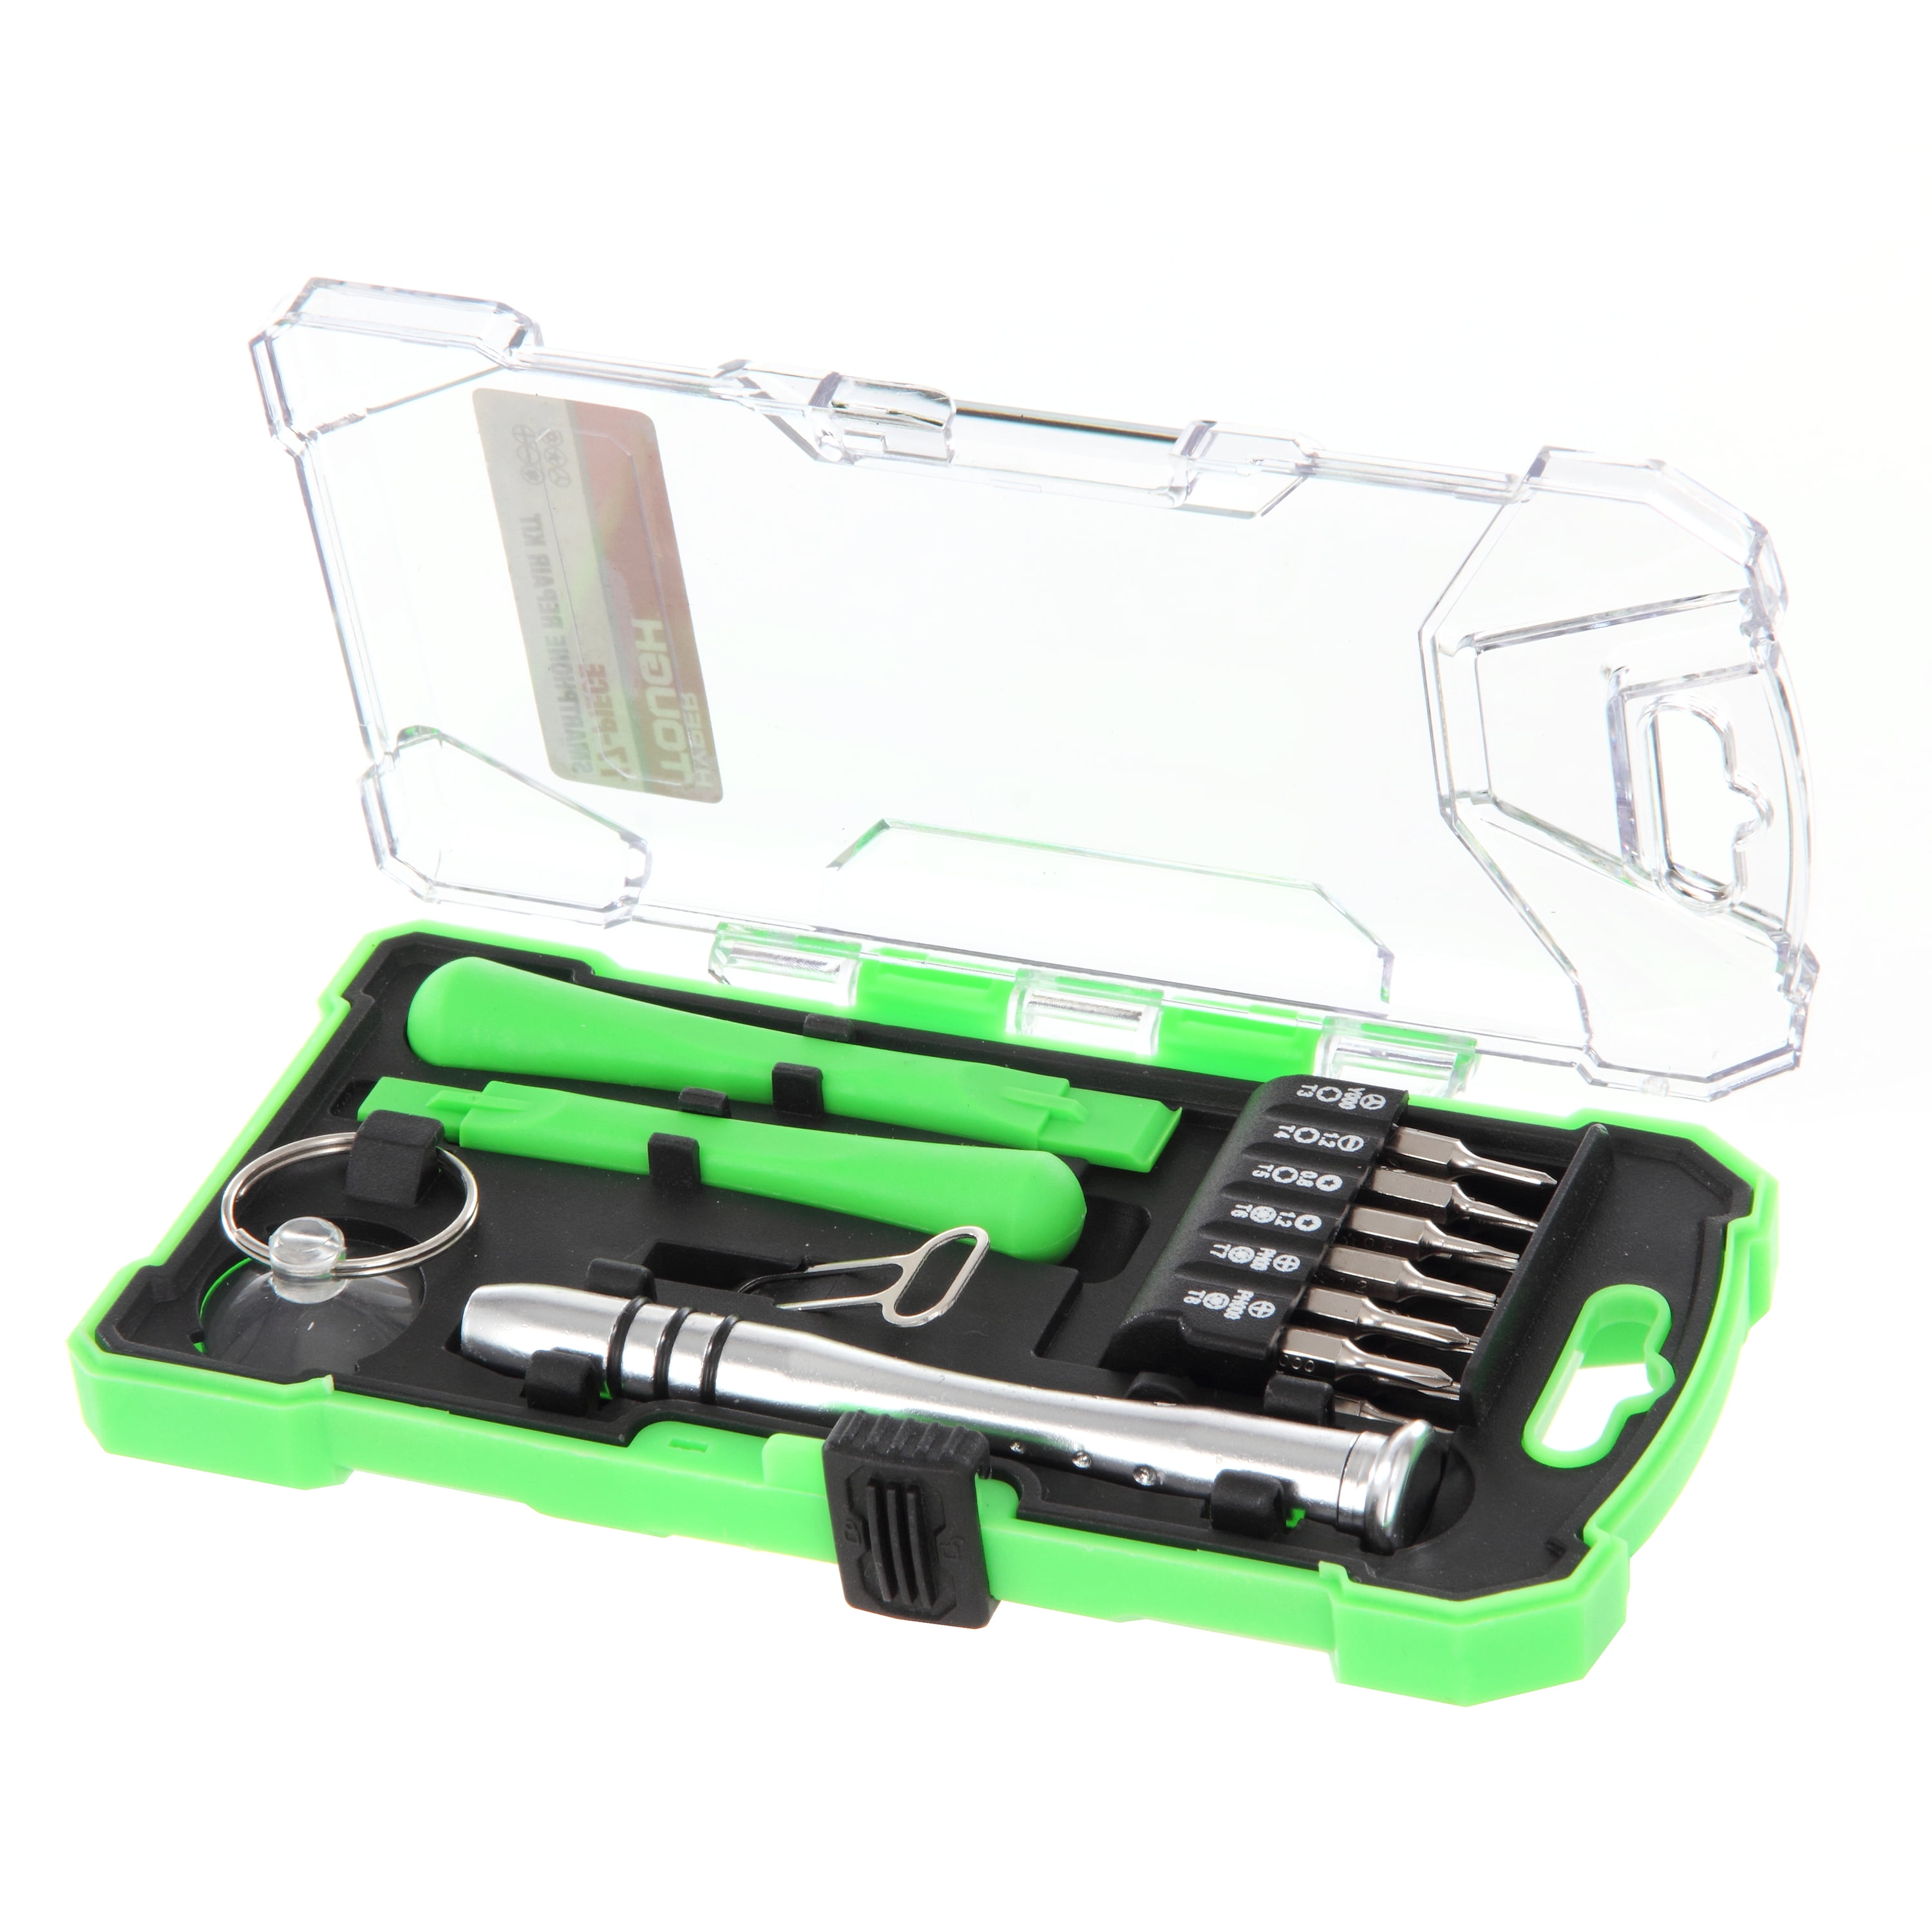 Hyper Tough 17 piece Smart Phone Repair Kit with Case TS85007A iPhone Samsung